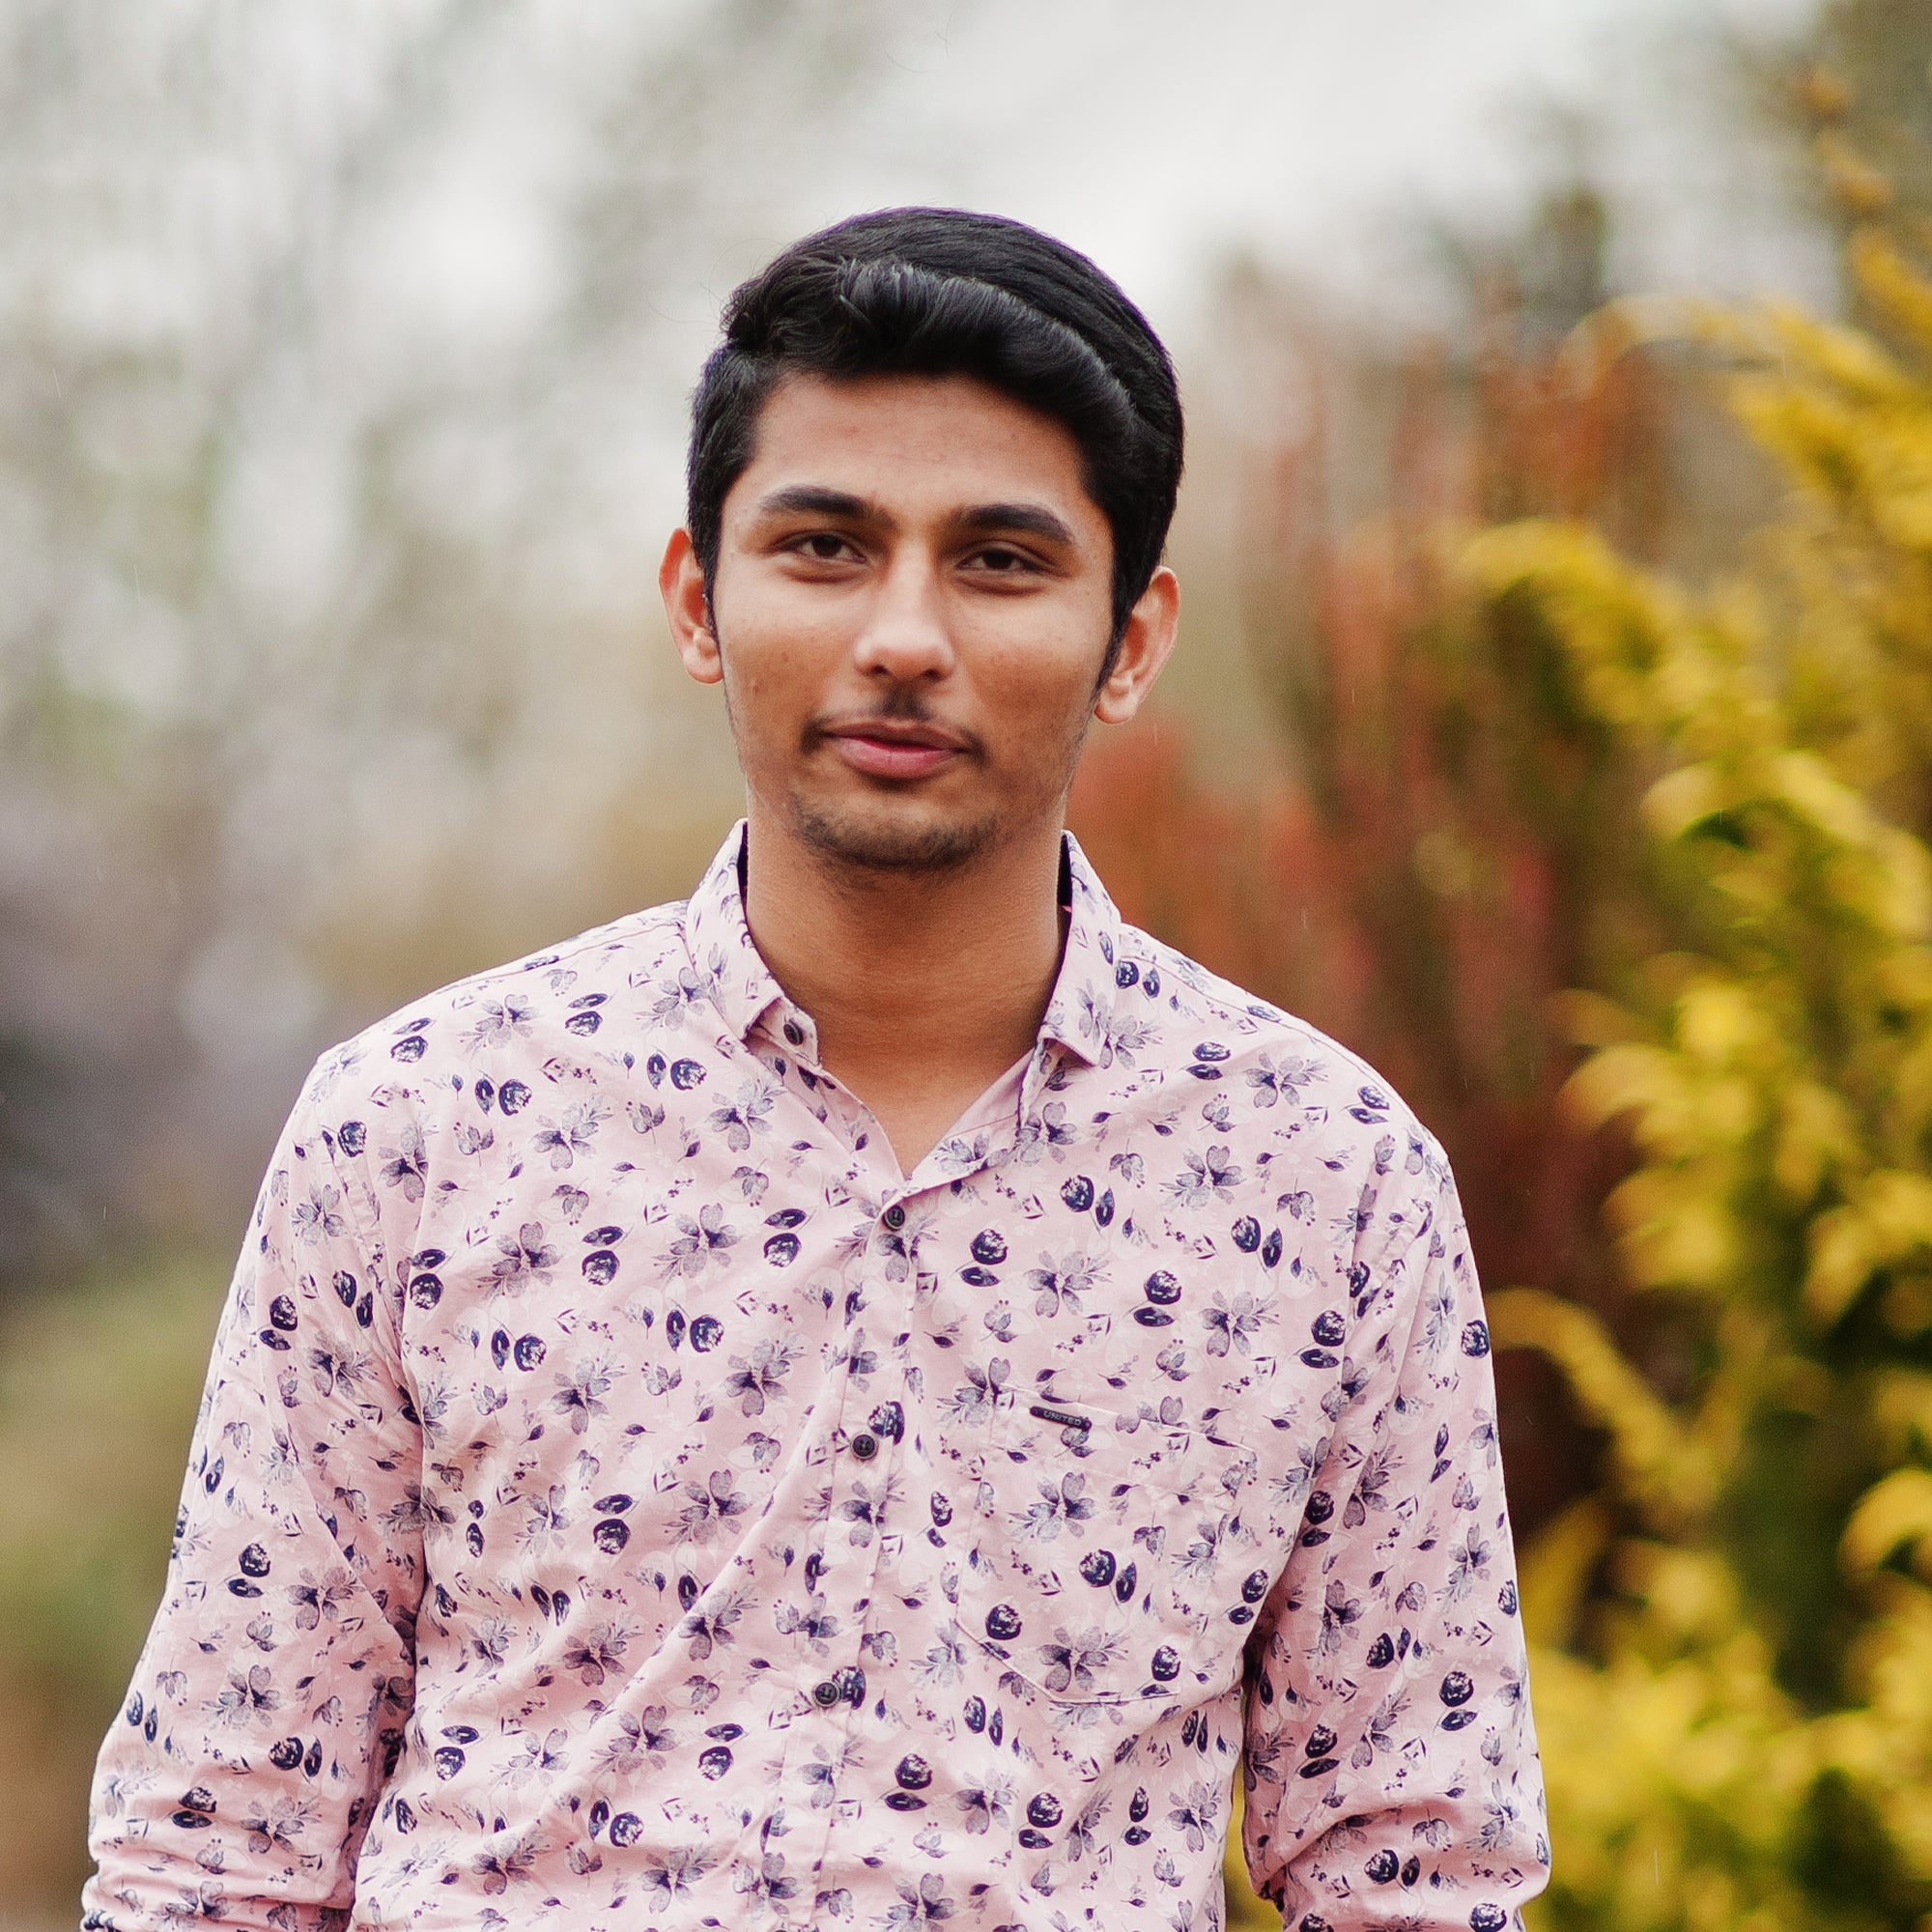 indian-man-student-shirt-posed-outdoor